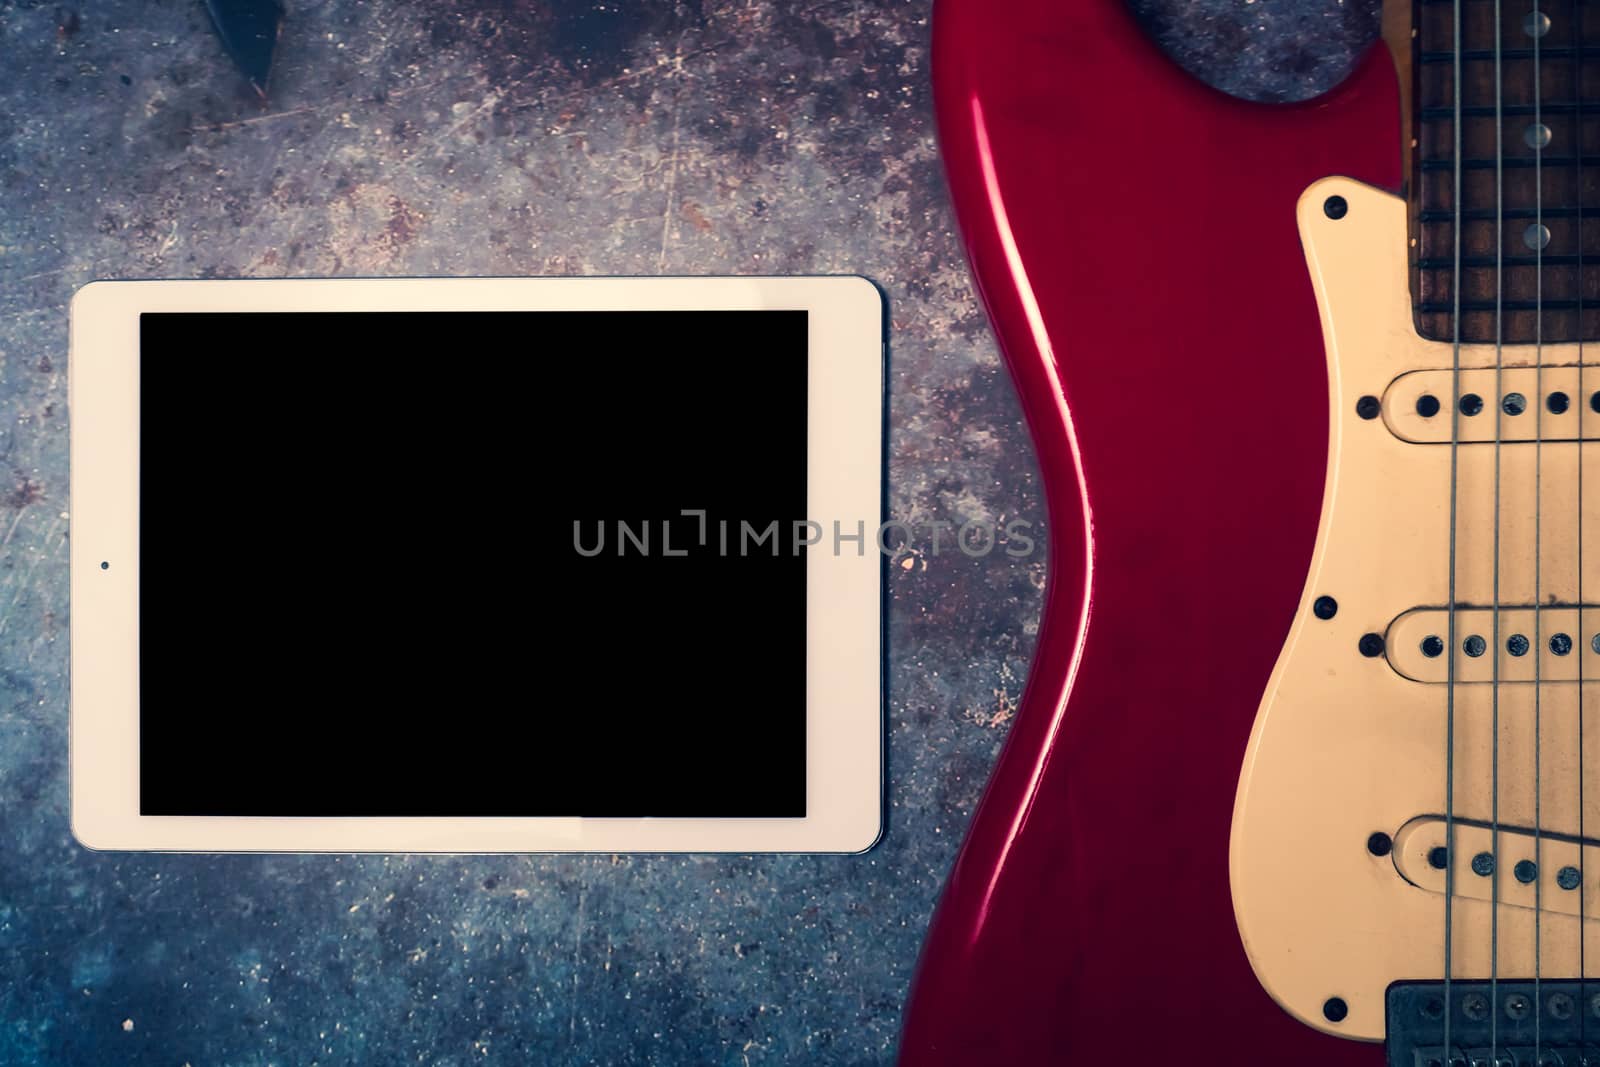 Tablet and electric guitar on a grunge background.